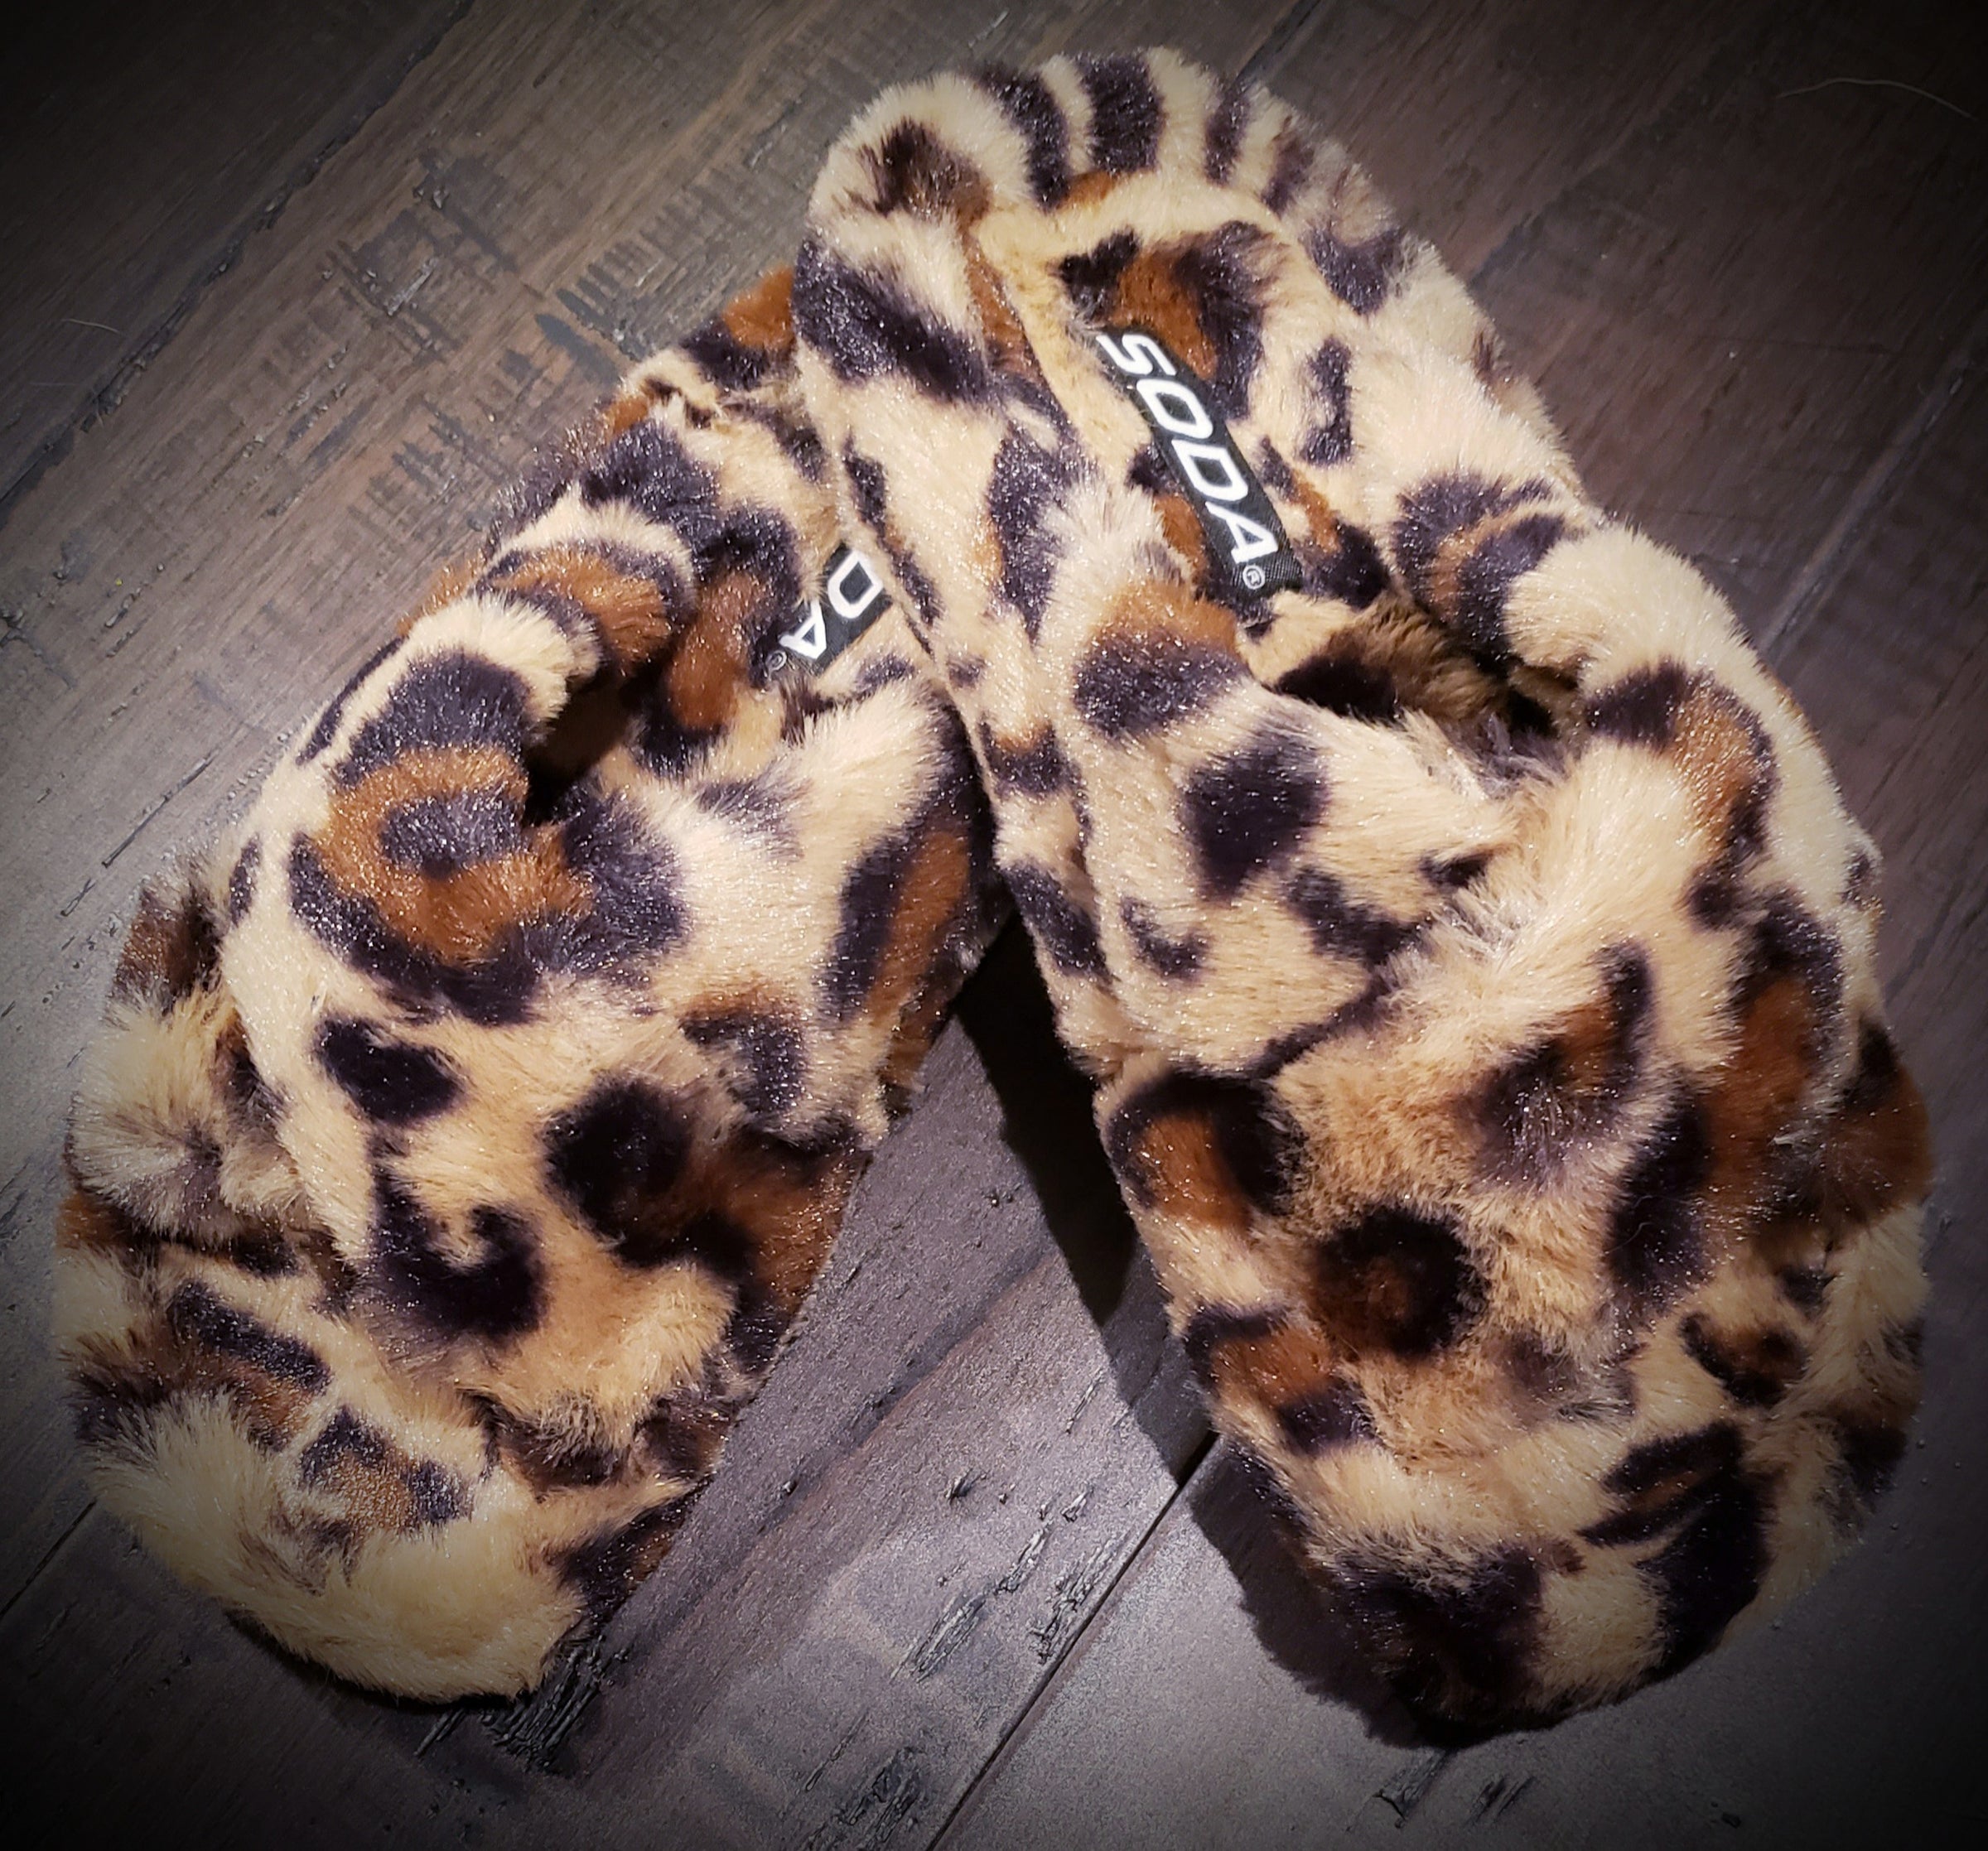 LEOPARD SLIPPERS